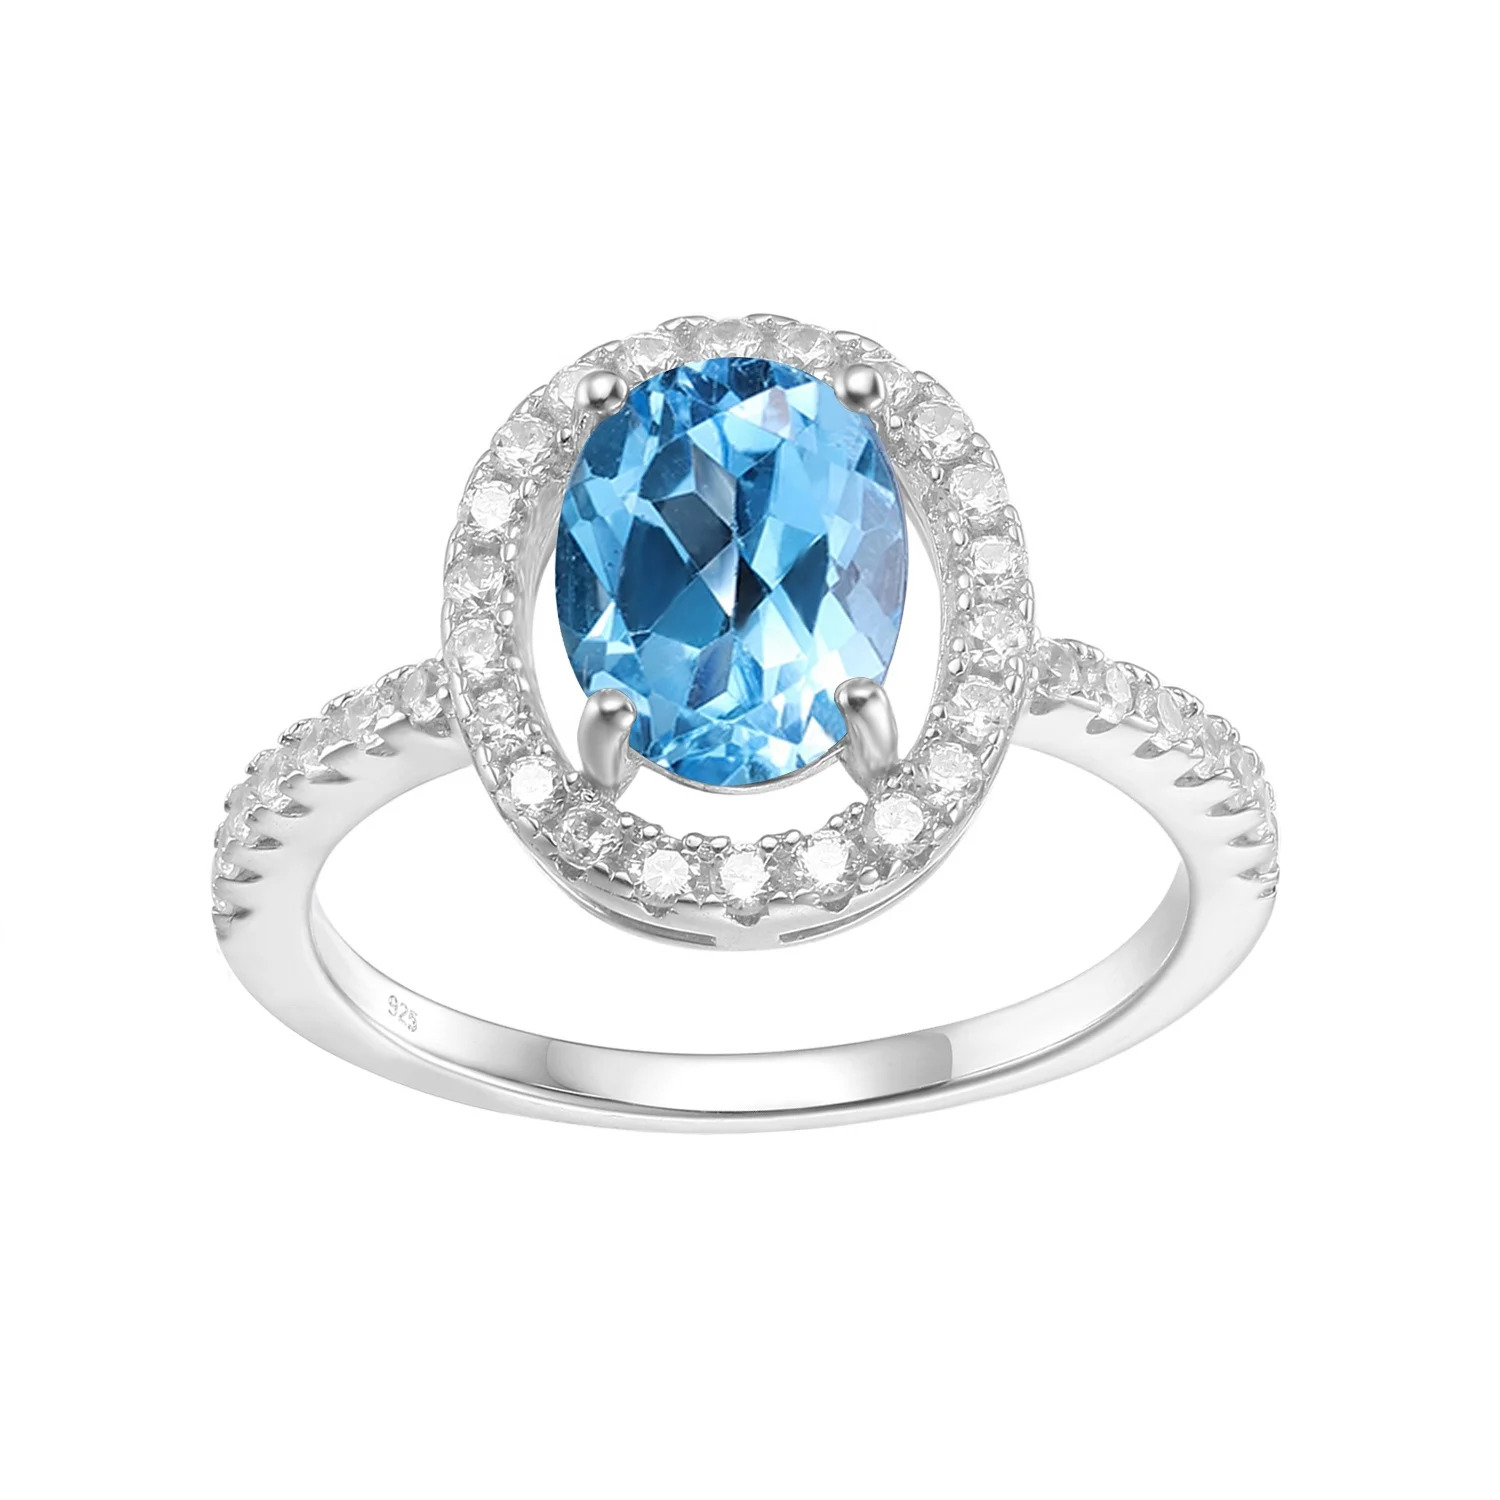 

Abiding High Quality 925 Sterling Silver Jewelry Rings Natural Blue Topaz Gemstone Halo Engagement Ring